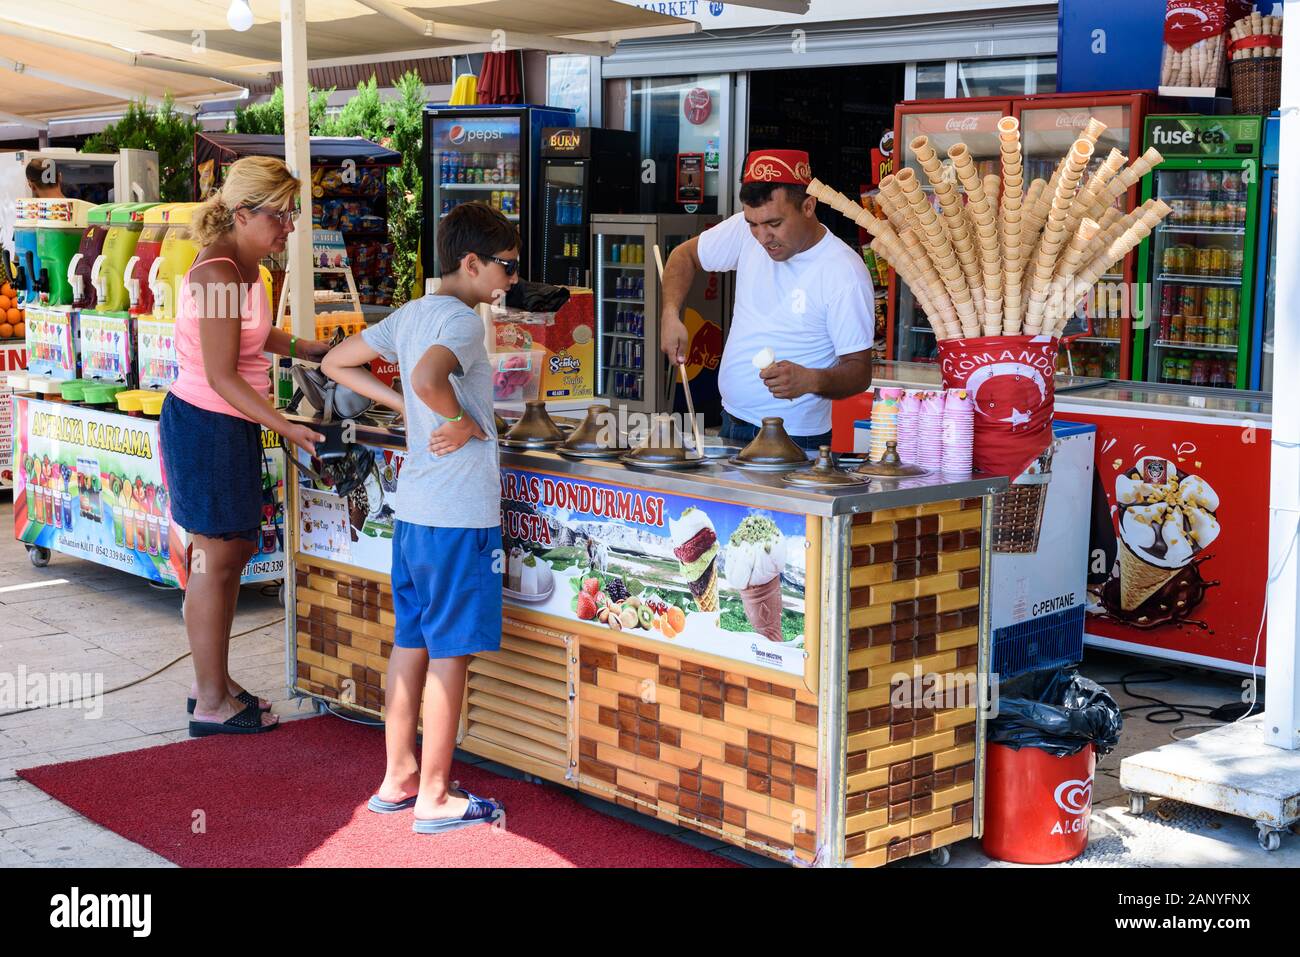 Antalya, Turkey - July 26, 2019: Ice cream Seller in Turkey in Antalya puts ice cream to a boy and a woman in sunny day Stock Photo